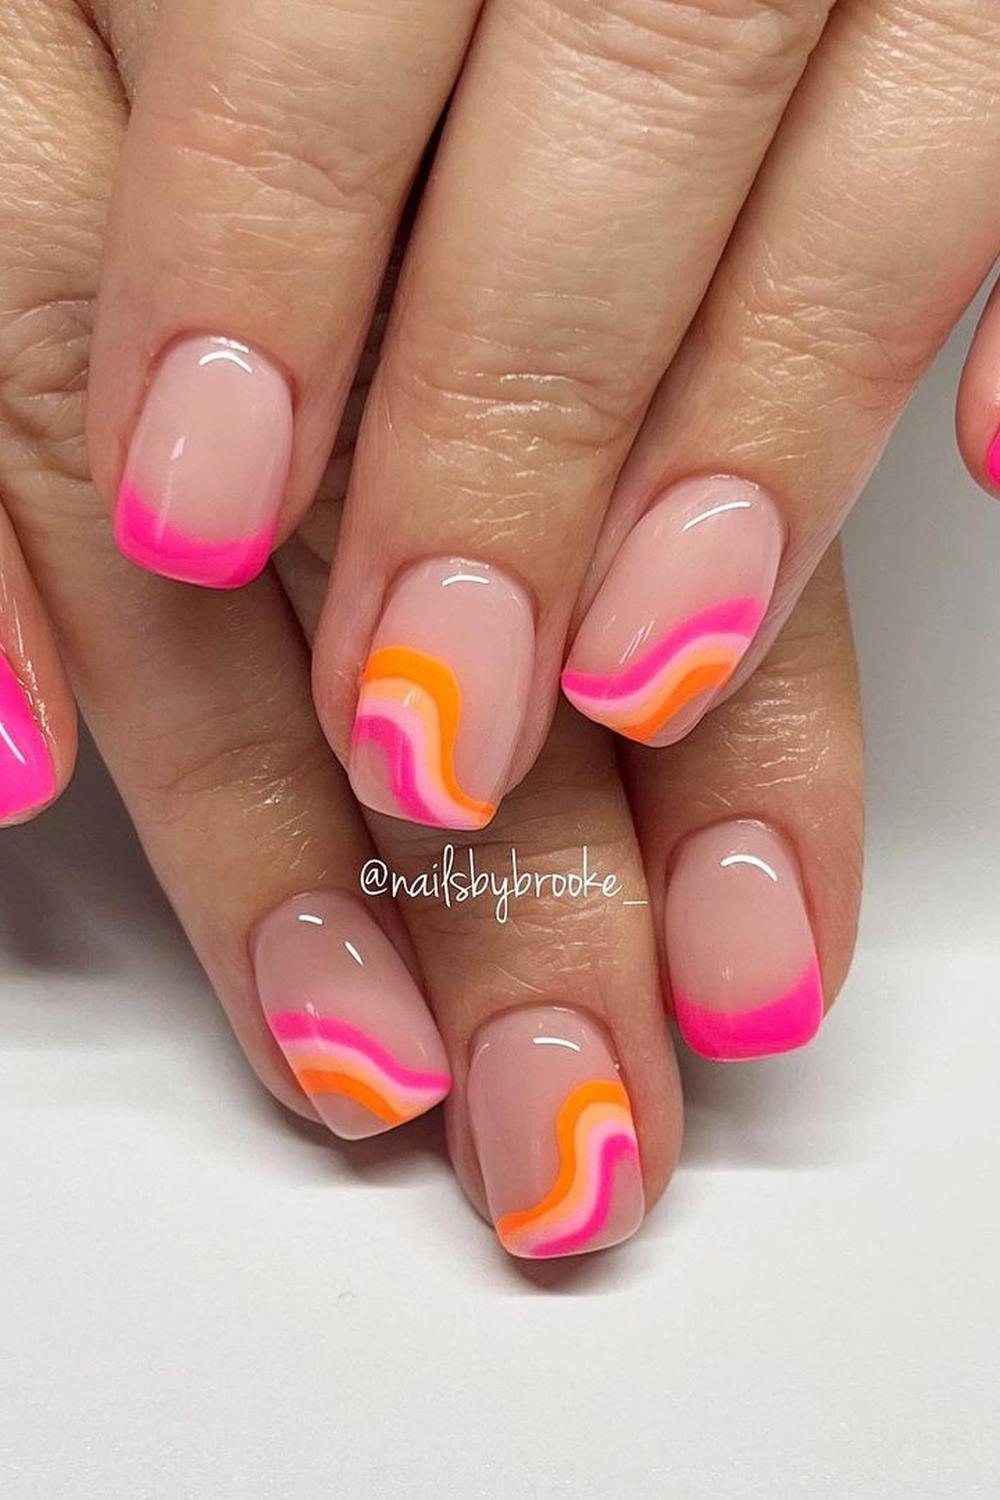 26 - Picture of Pink and Orange Nails